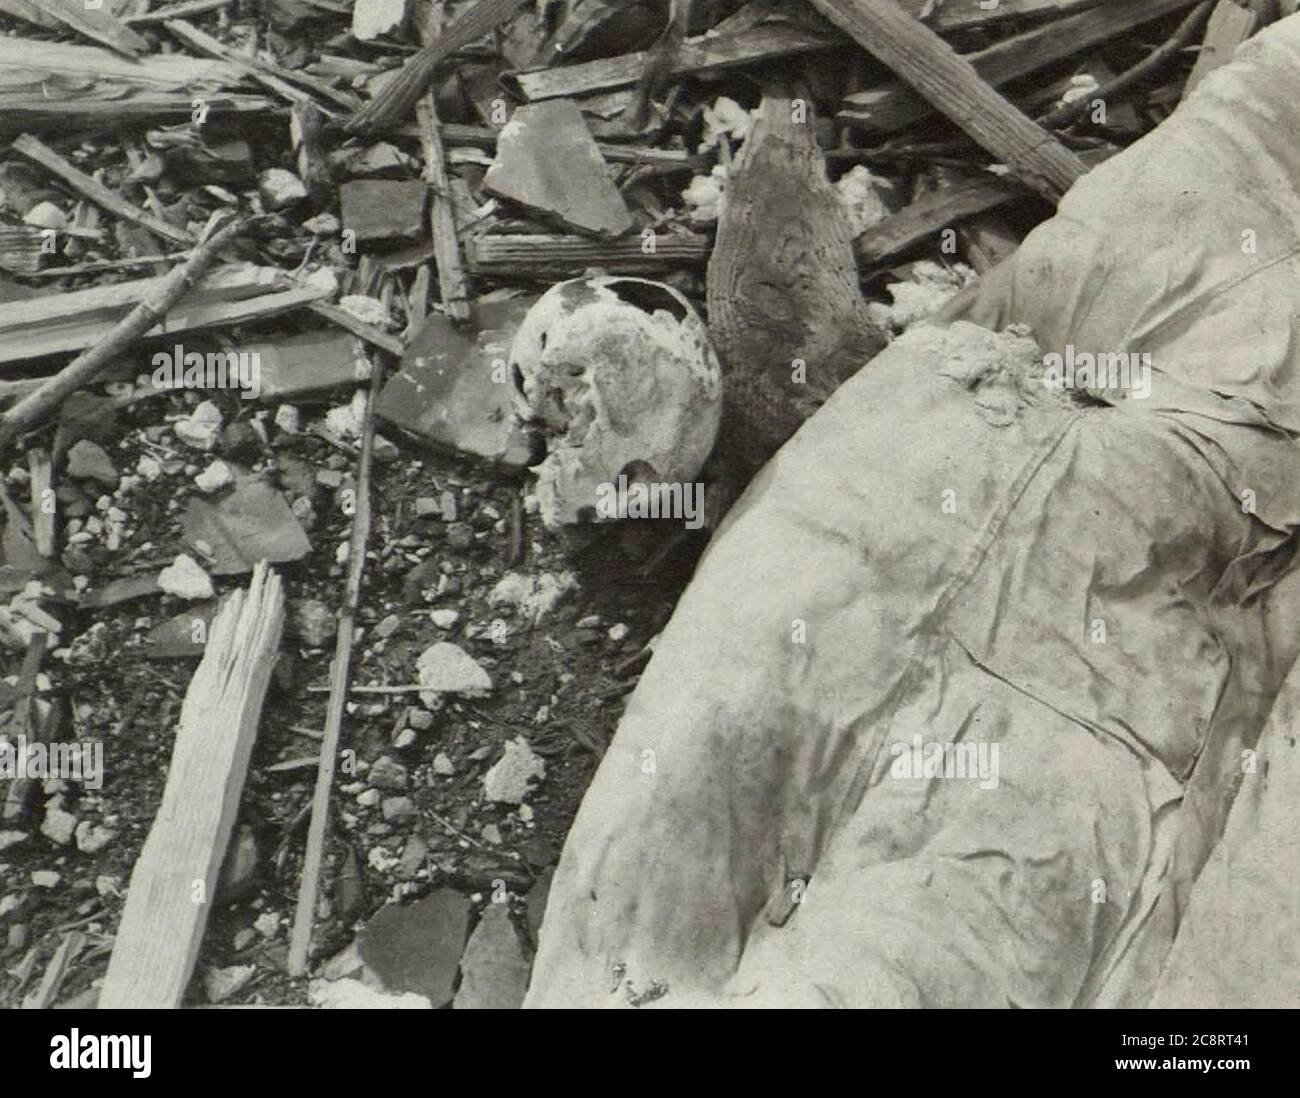 A skull among the ruins in the city of Hiroshima, Japan after the Atomic Bomb attack - late 1945 or early 1946 Stock Photo